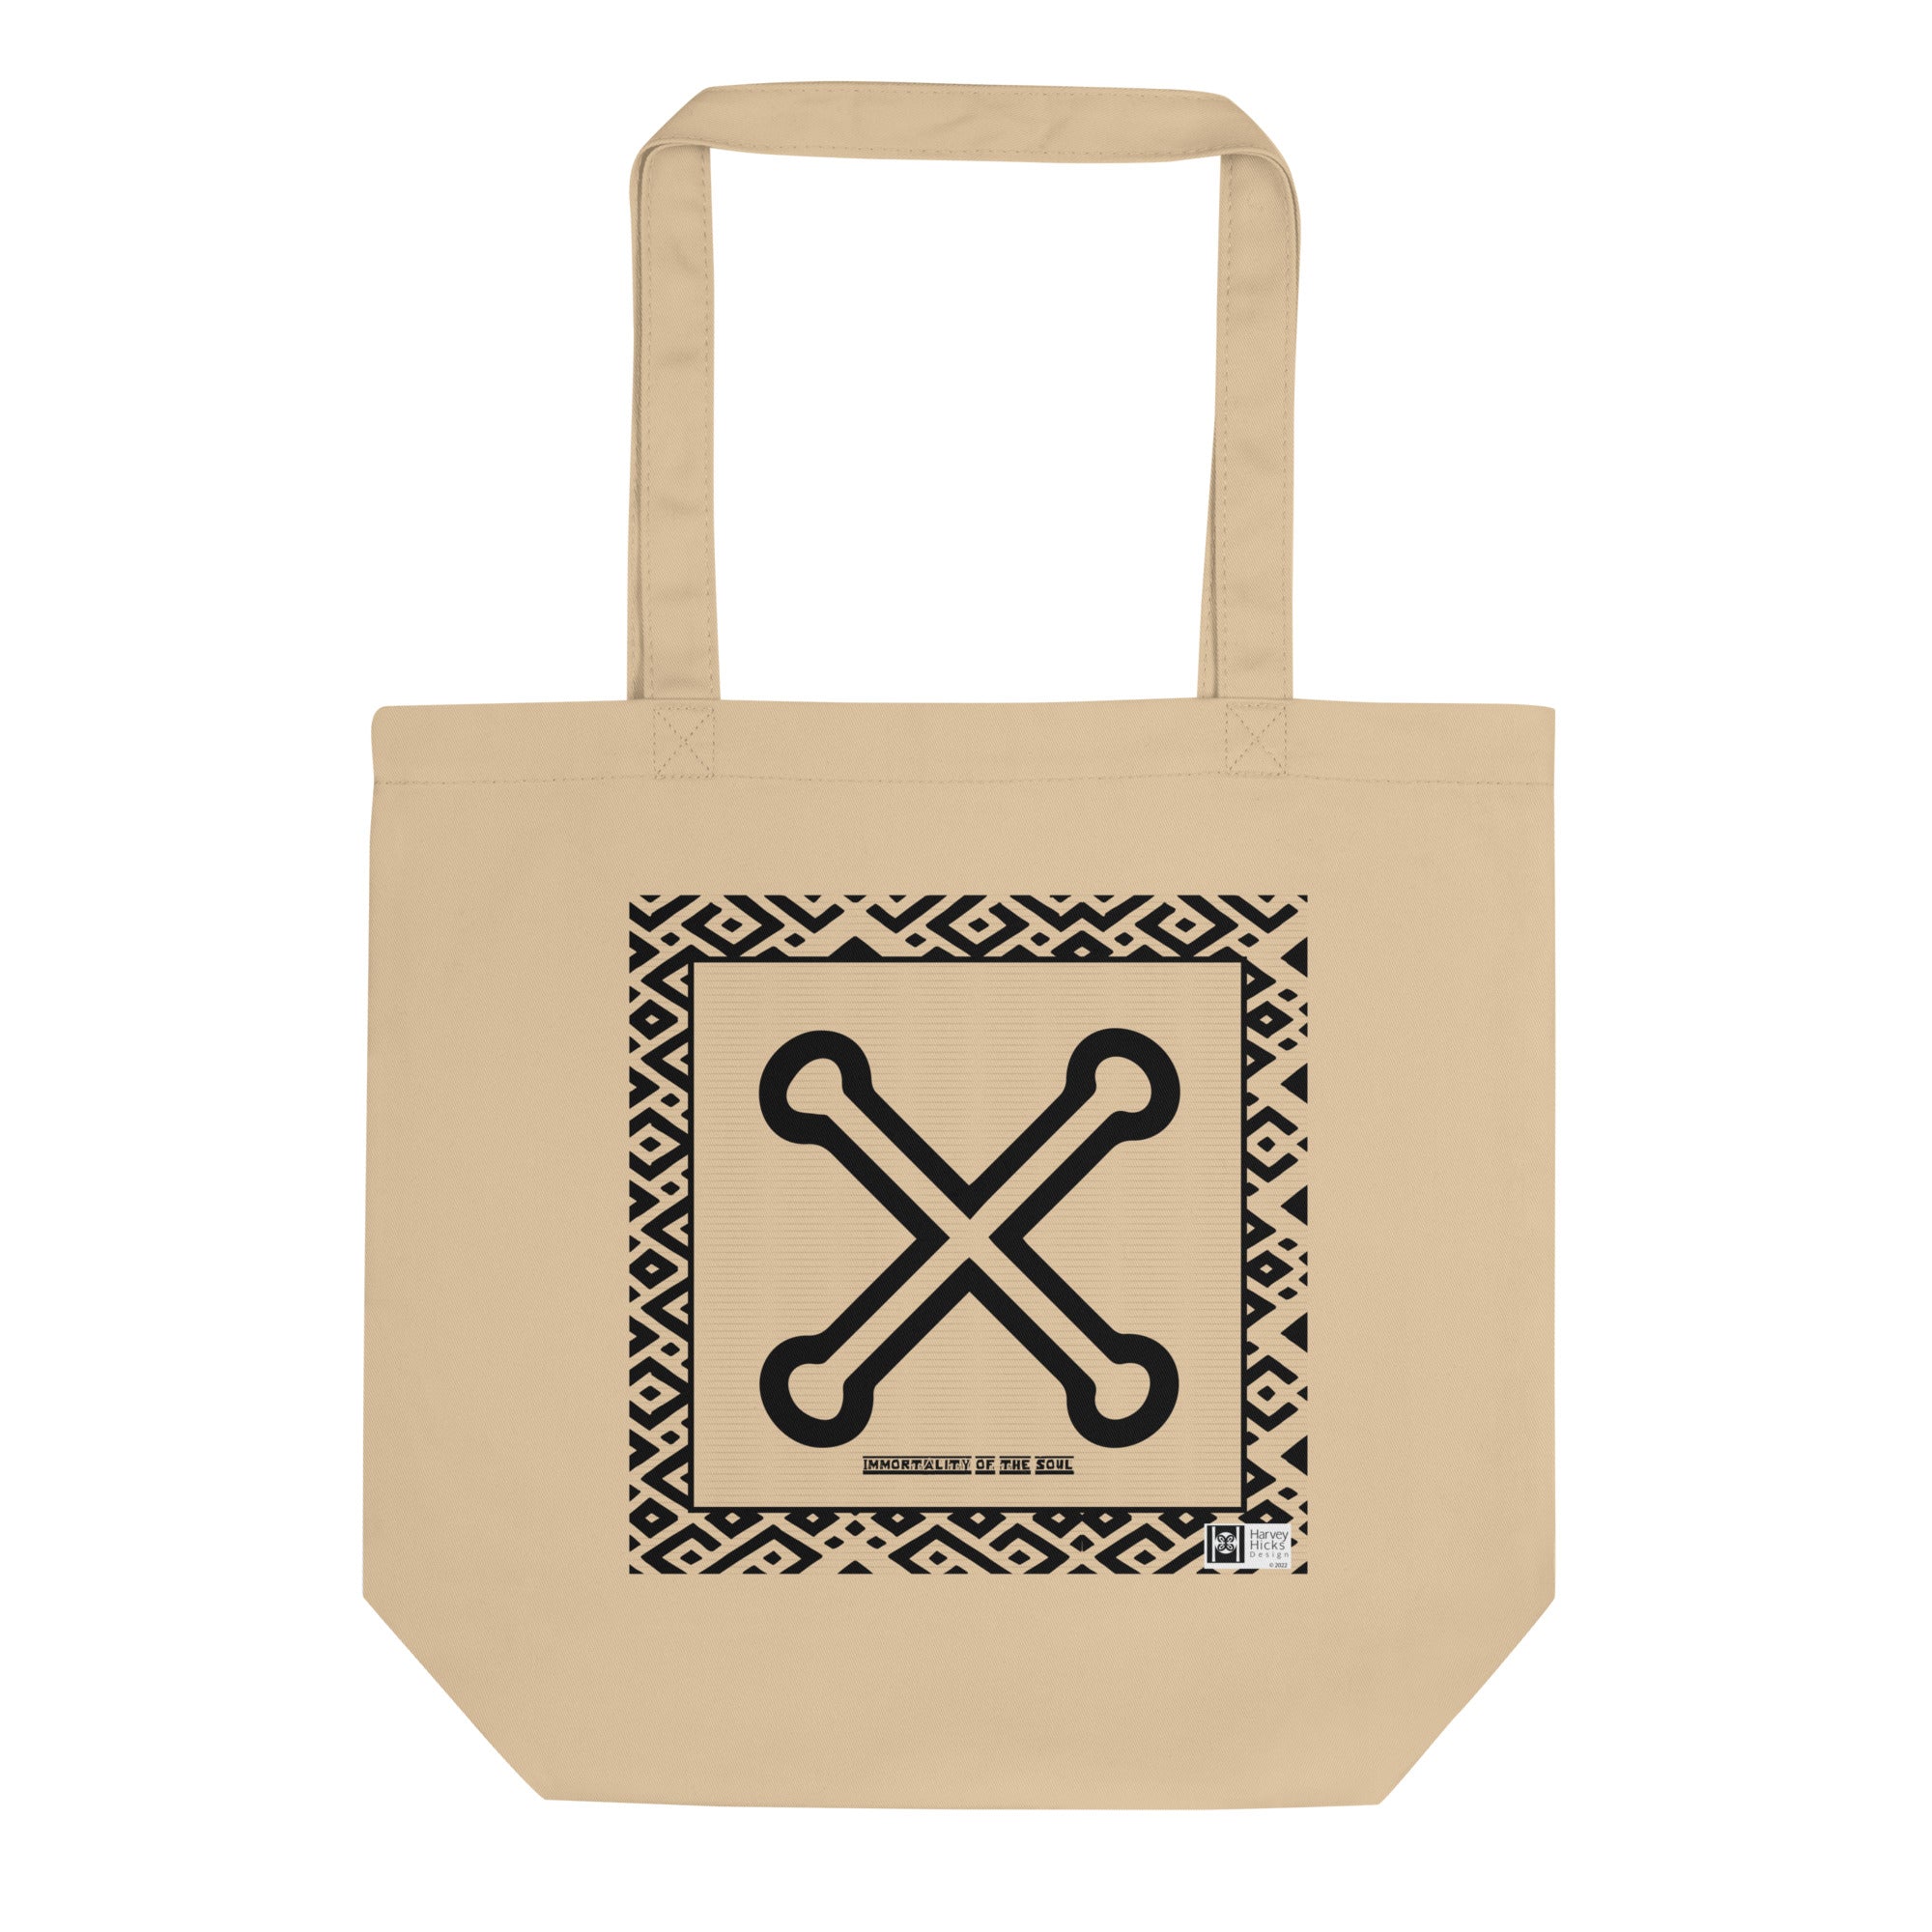 100% cotton Eco Tote Bag, featuring the Adinkra symbol for immortality